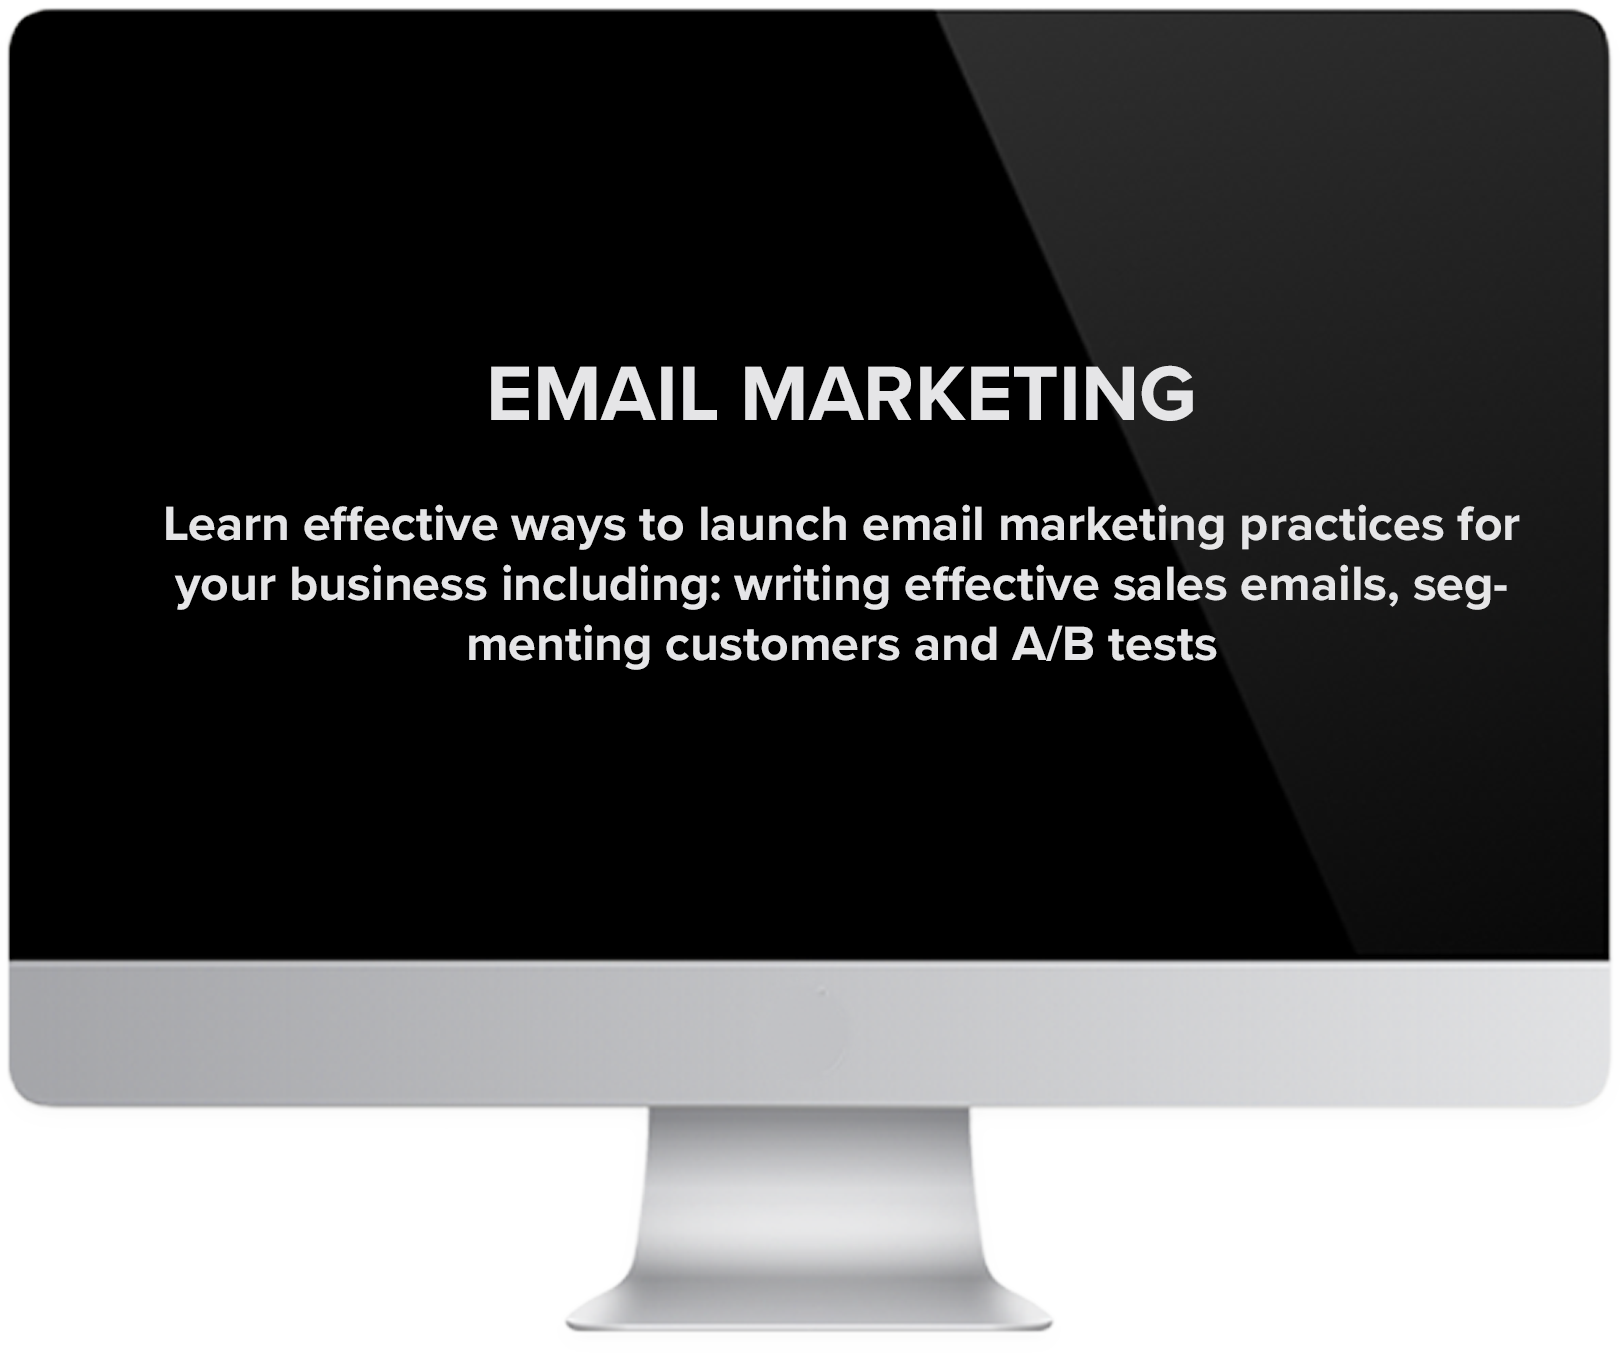 Email Marketing training to help you launch successful email marketing campaigns